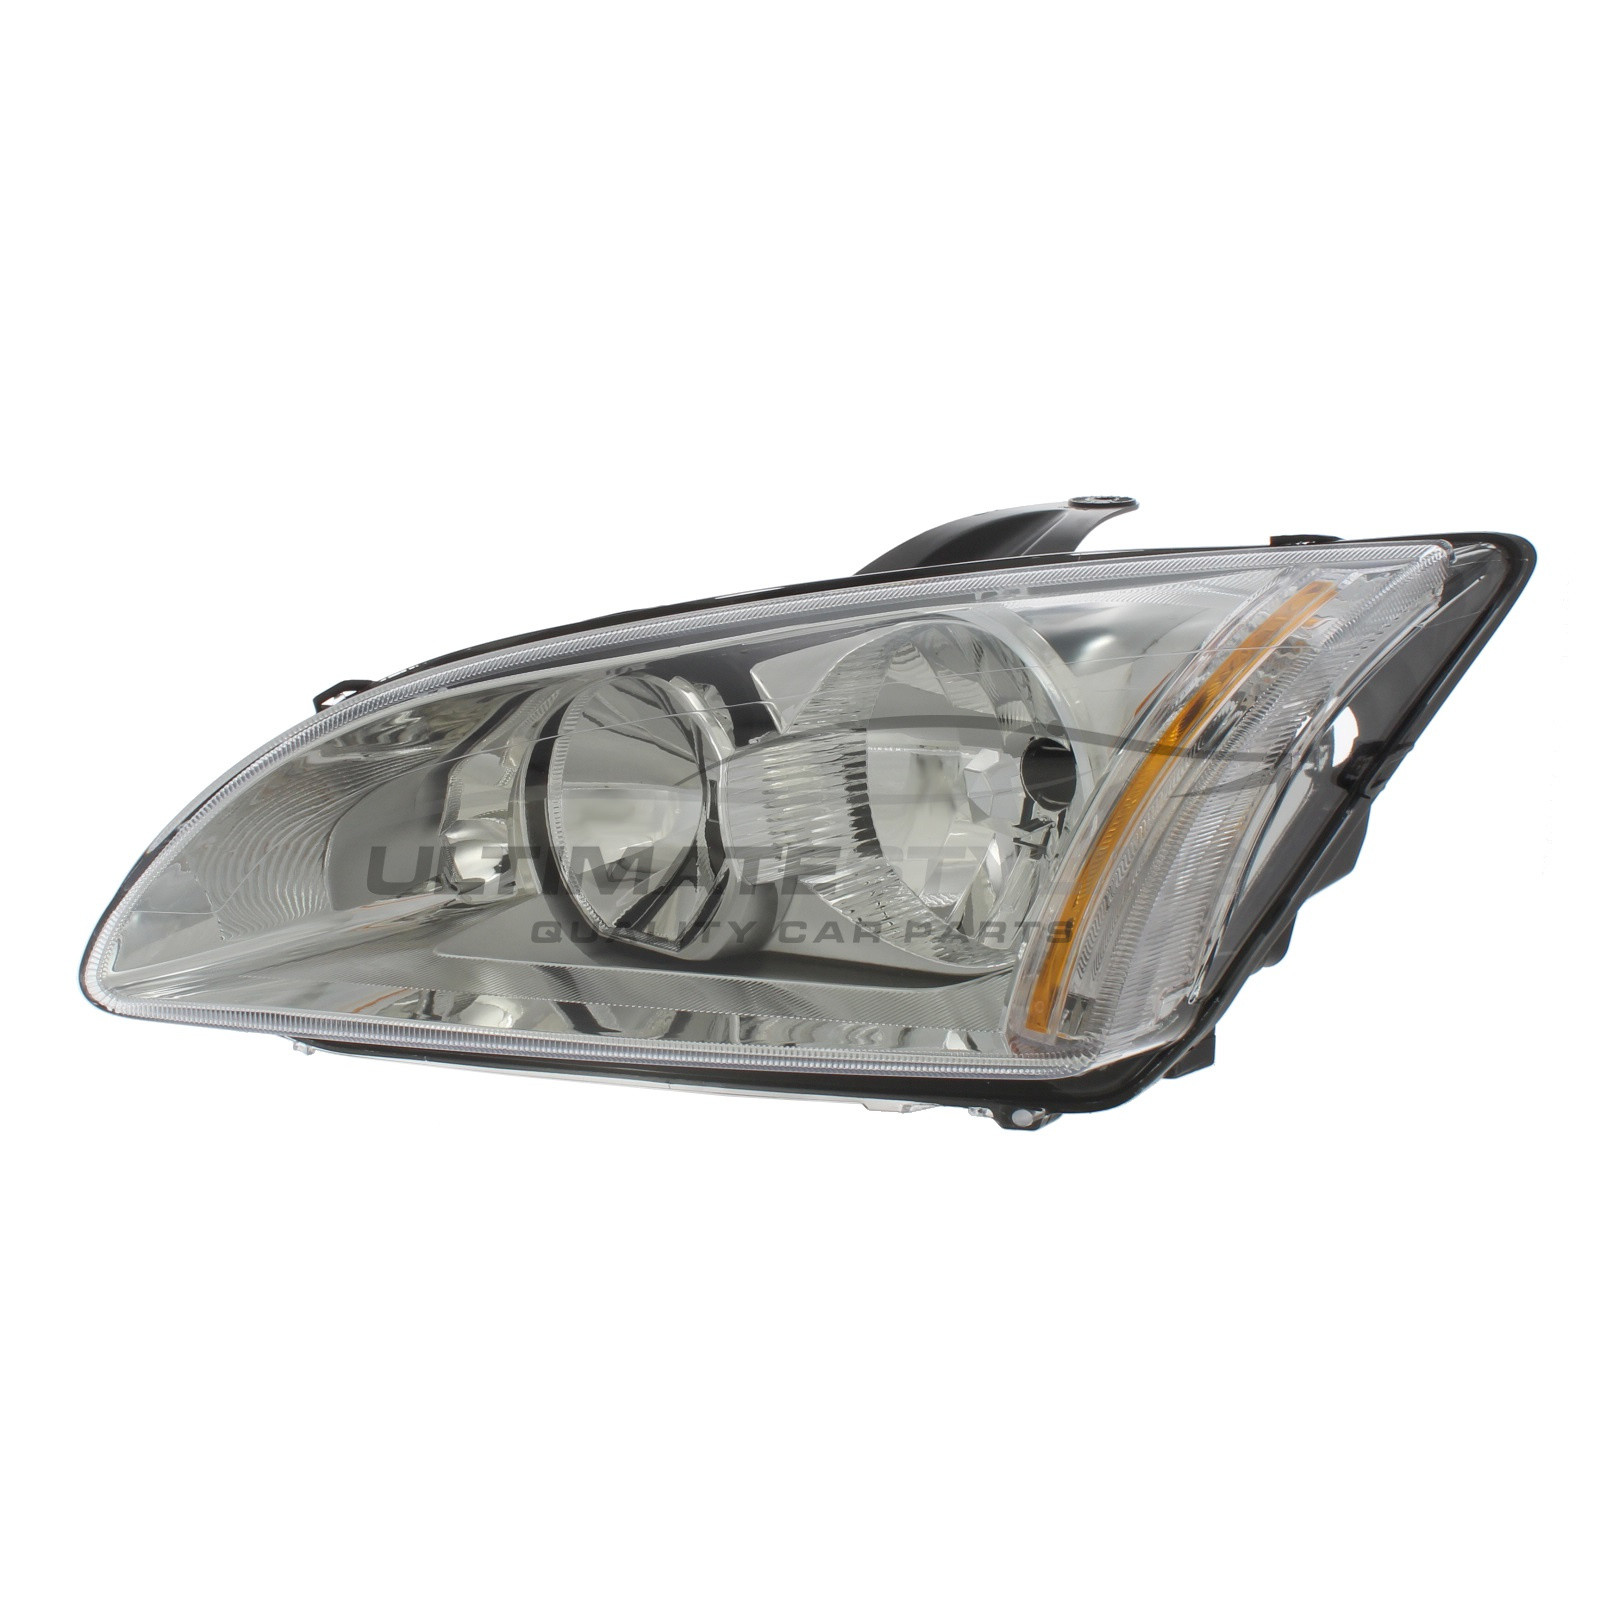 Ford Focus 2005-2008 Halogen, Electric Without Motor, Chrome Headlight / Headlamp Passengers Side (LH)